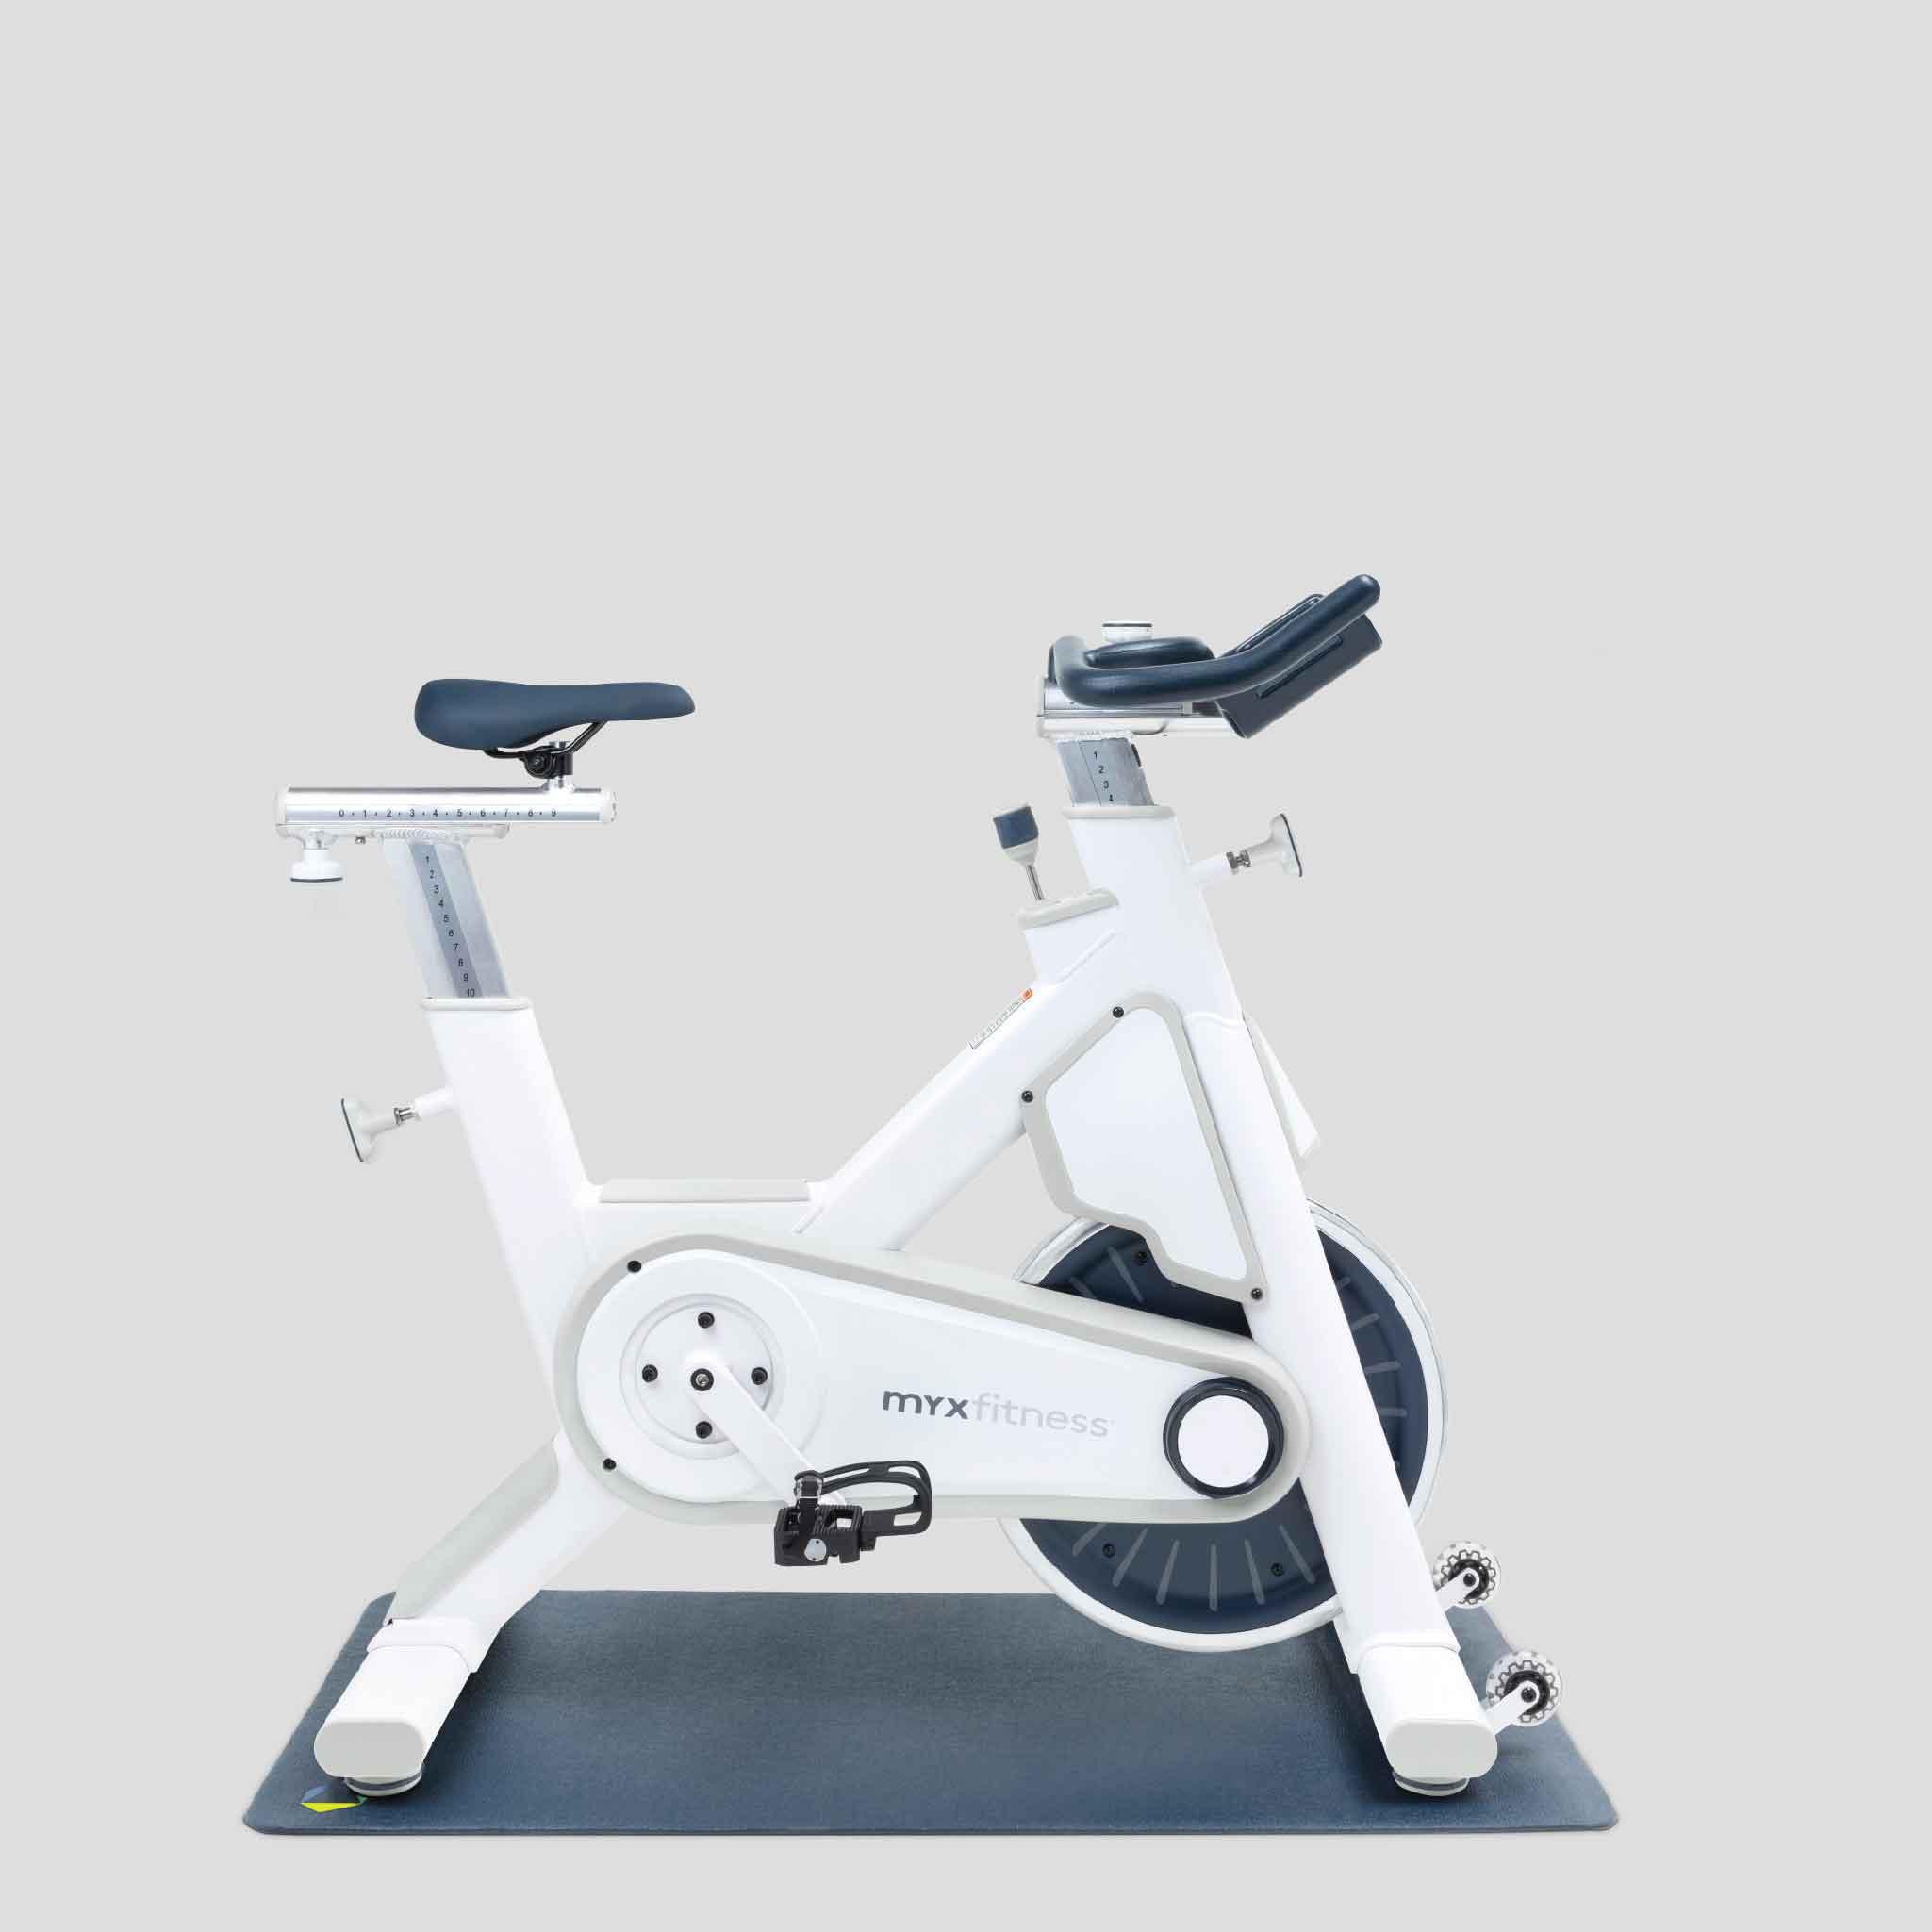 The BODi Bike+ Home Studio in Natural White with weight rack, foam roller, spri stretch band, kettlebell and floor mats